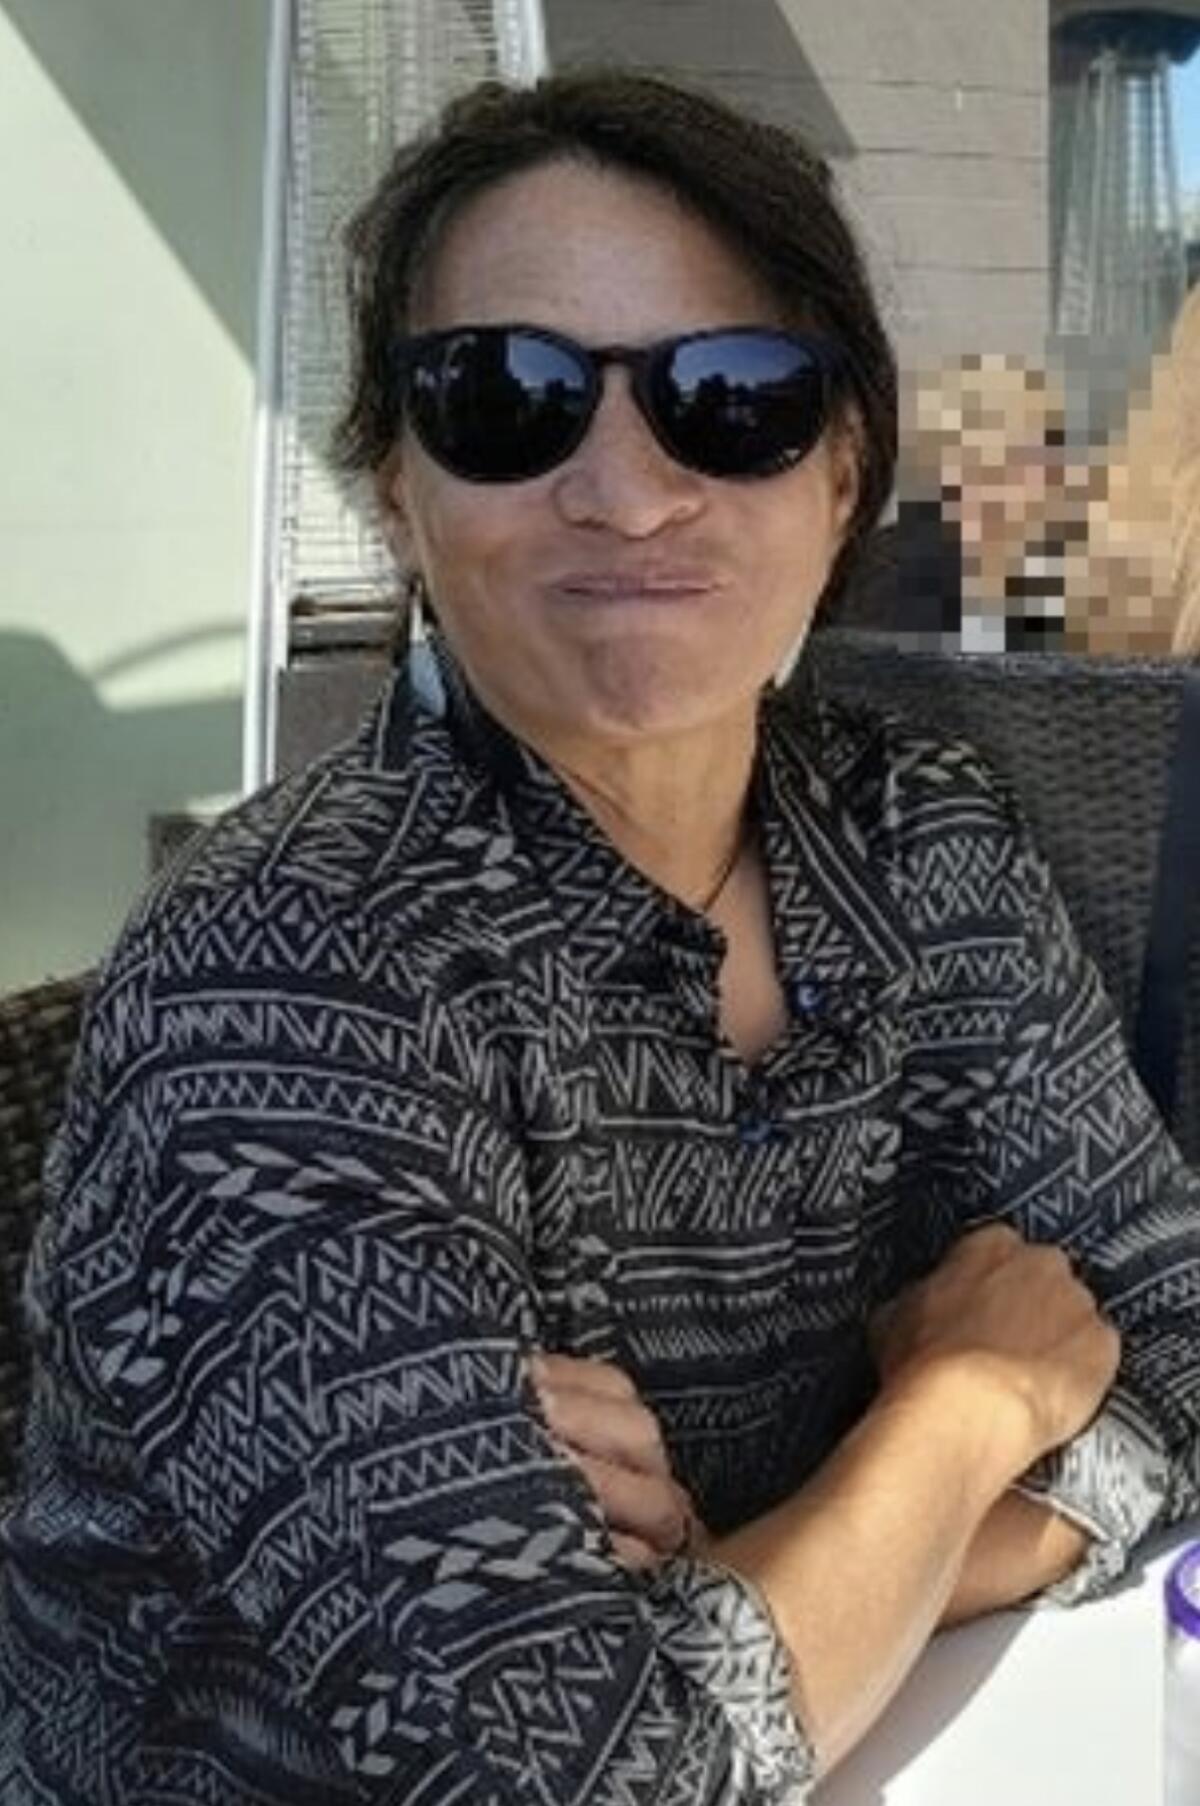 A woman wearing sunglasses smiles while folding her arms in front of her.